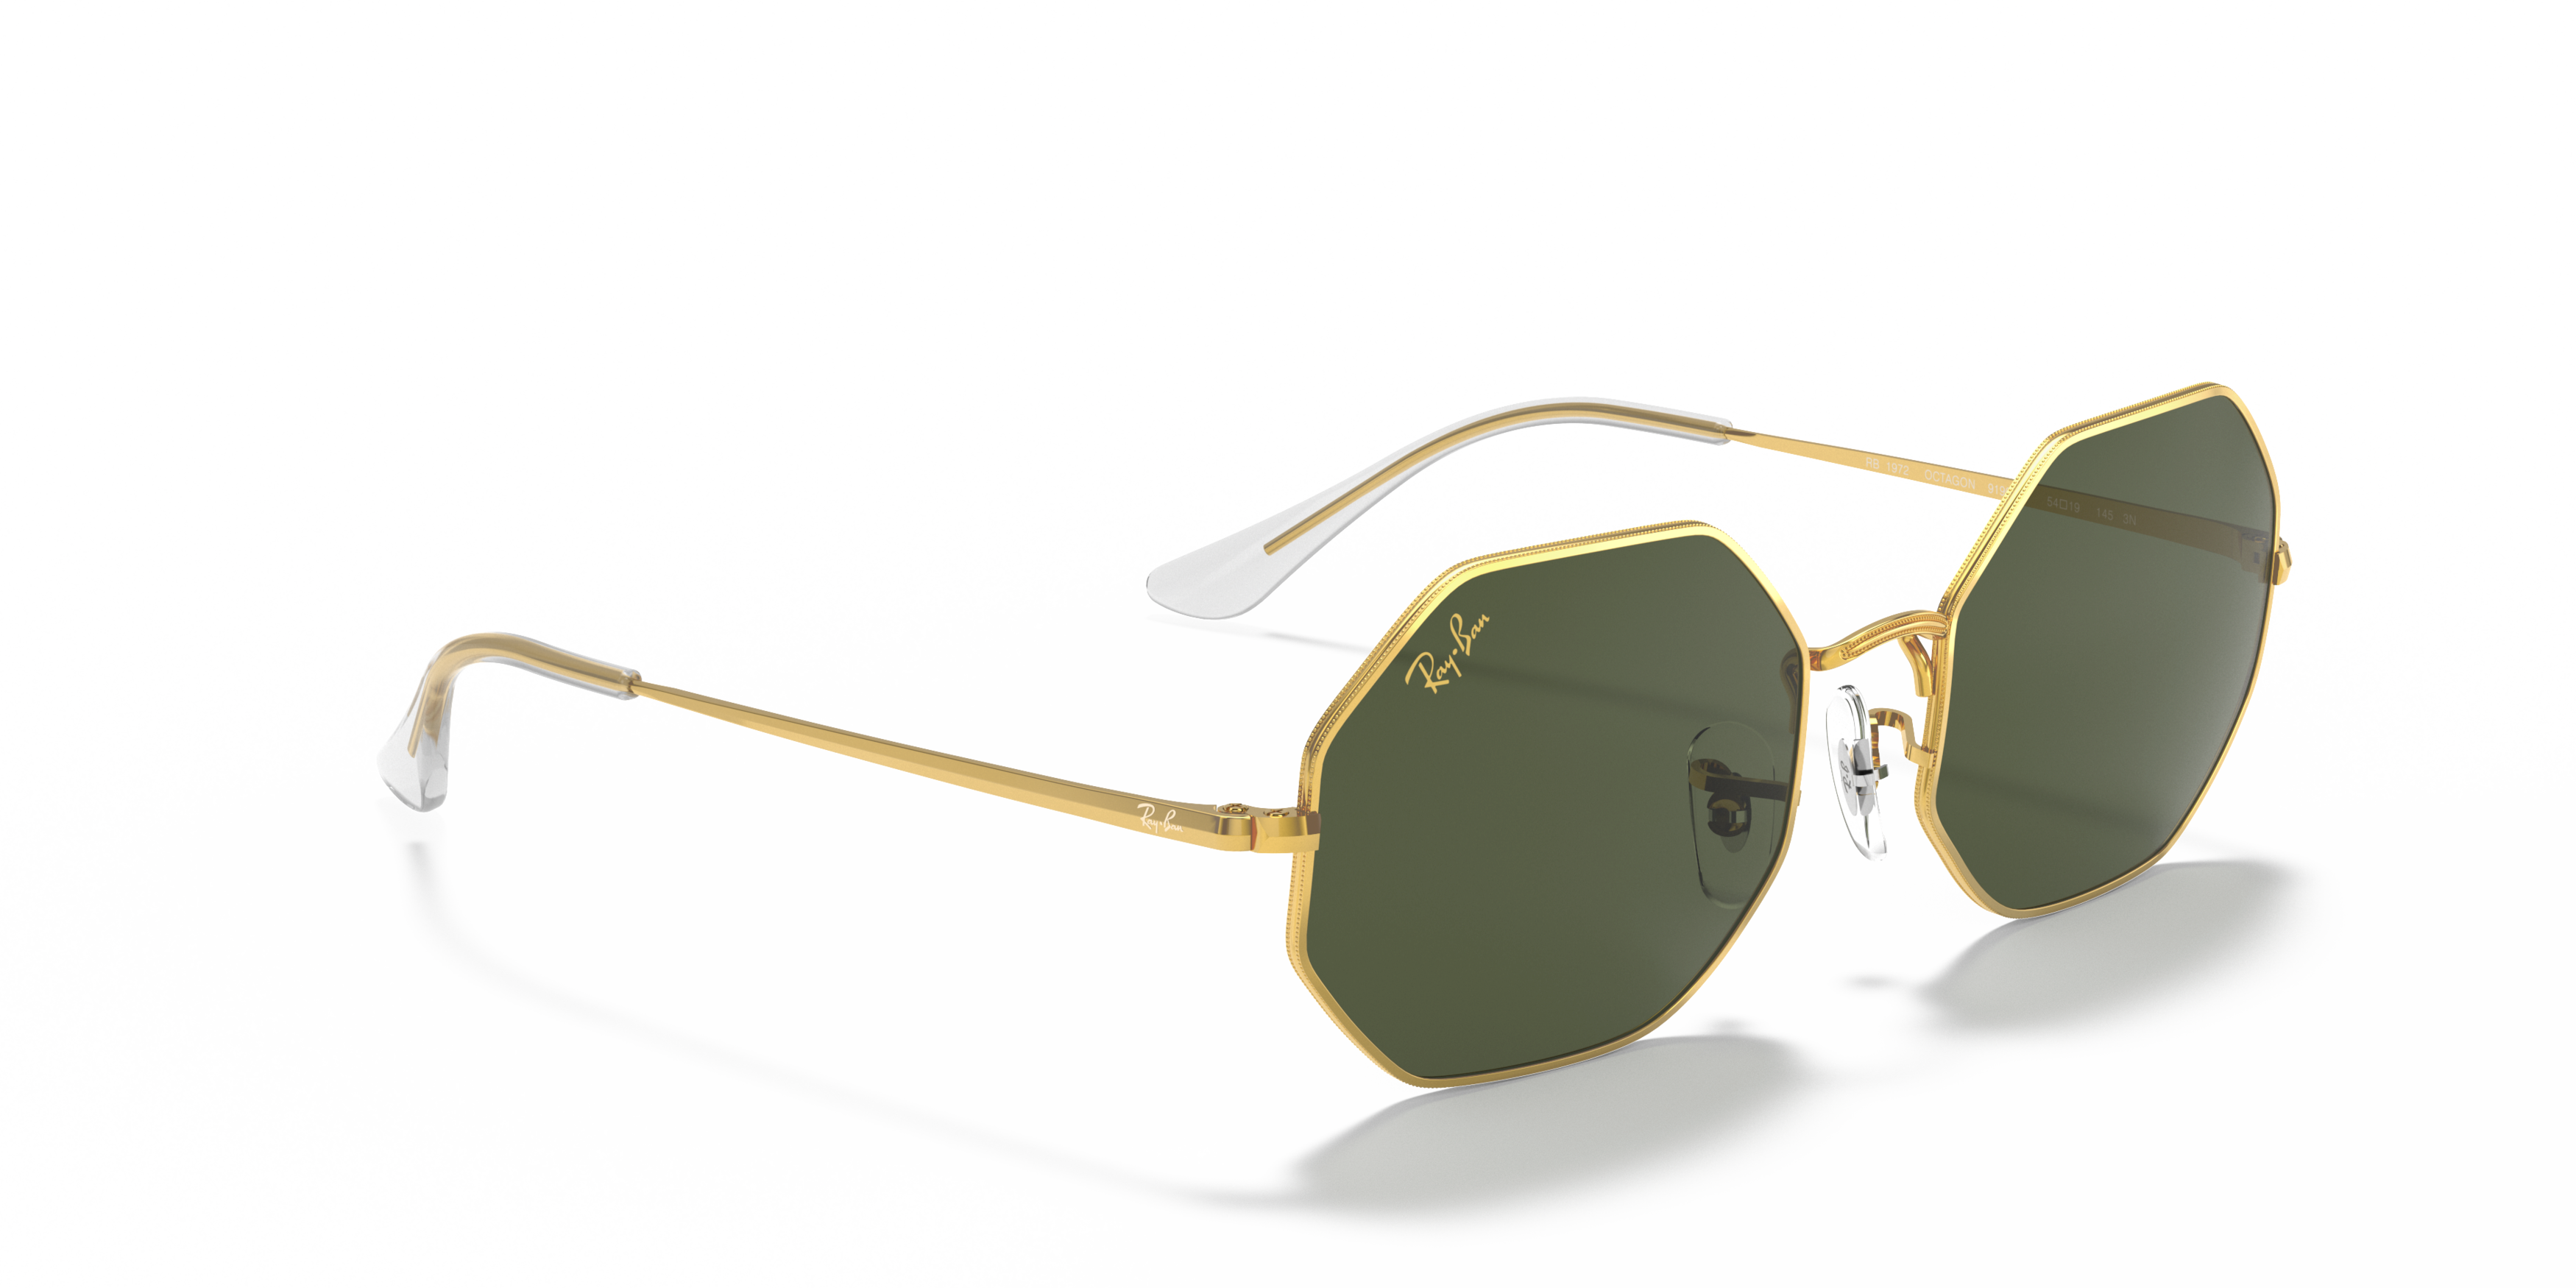 Angle_Right01 Ray-Ban Octagon RB 1972 (919631) Sunglasses Green / Gold